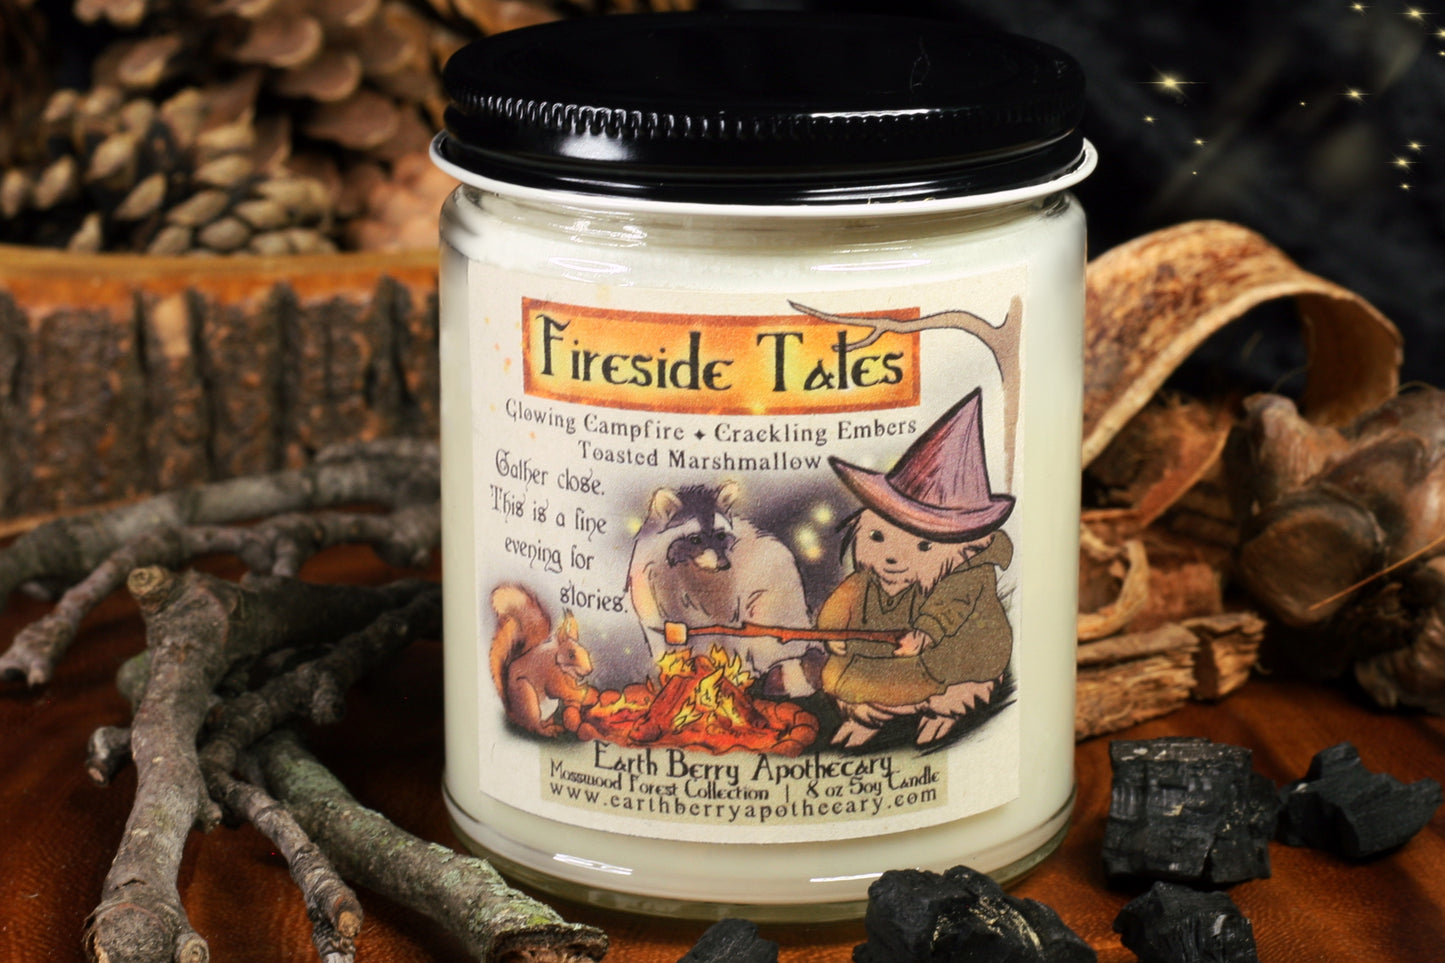 Fireside tales soy candle scented with campfire embers and toasted marshmallows. The hedgewitch sits in front of a campfire, tossing a marshmallow, while a raccoon and squirrel tell stories.